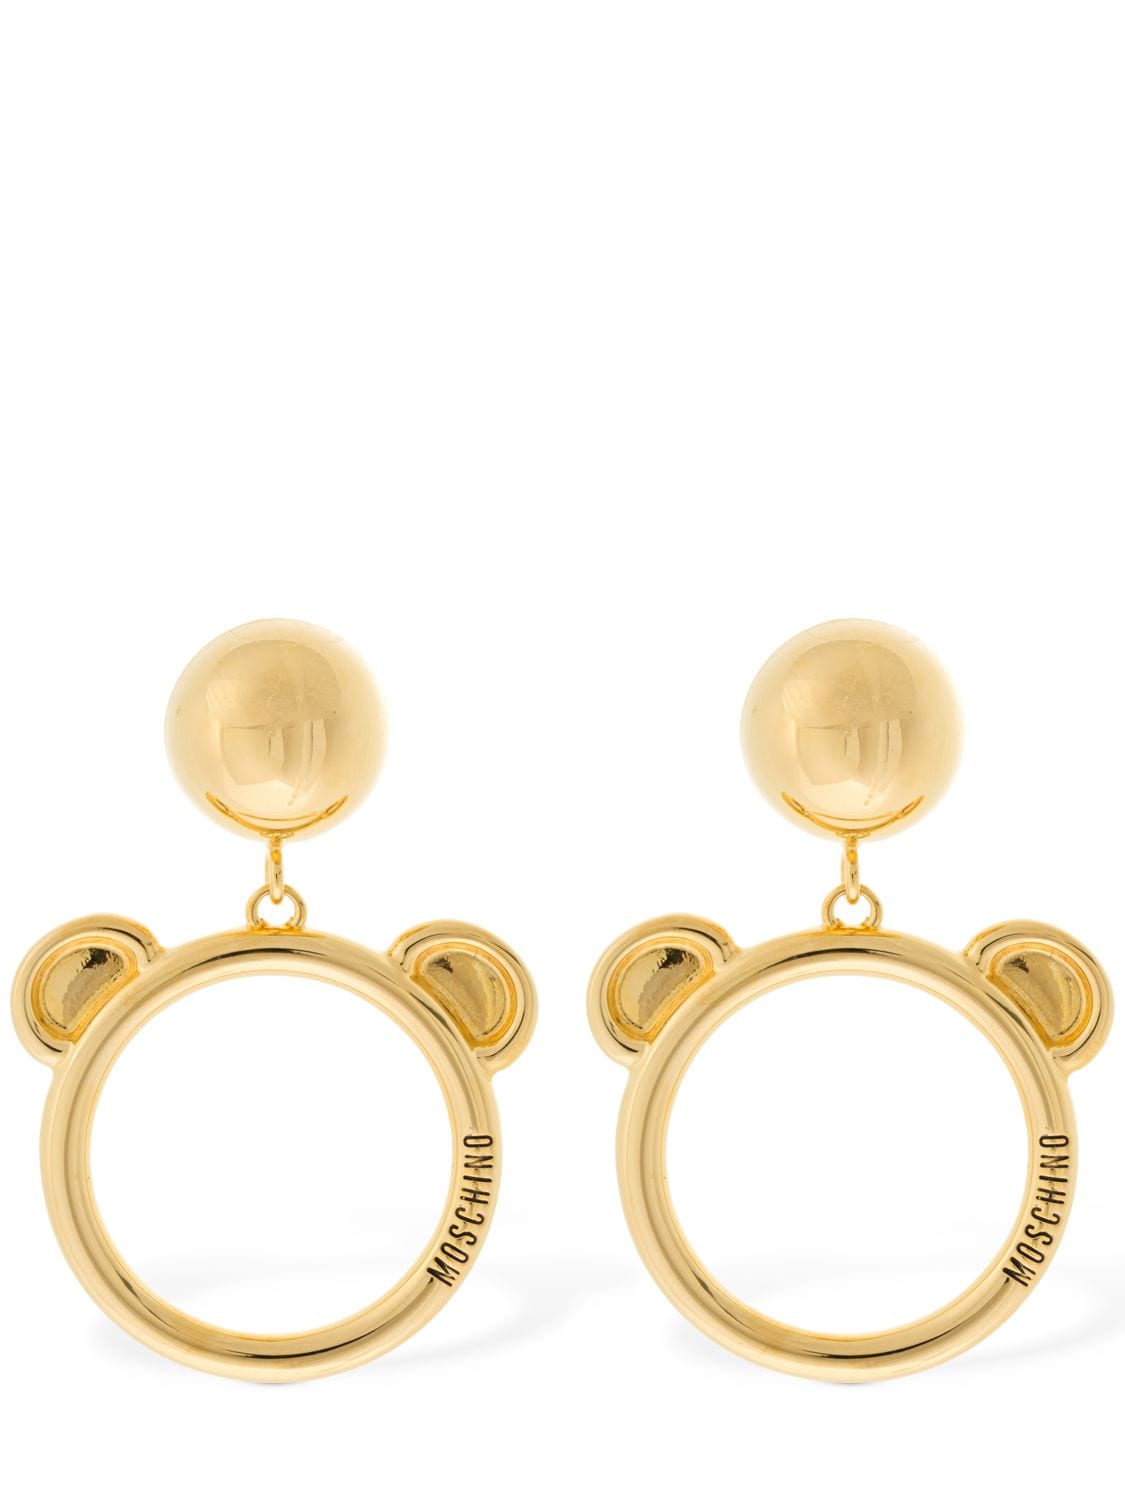 MOSCHINO Teddy Circle Clip-on Earrings